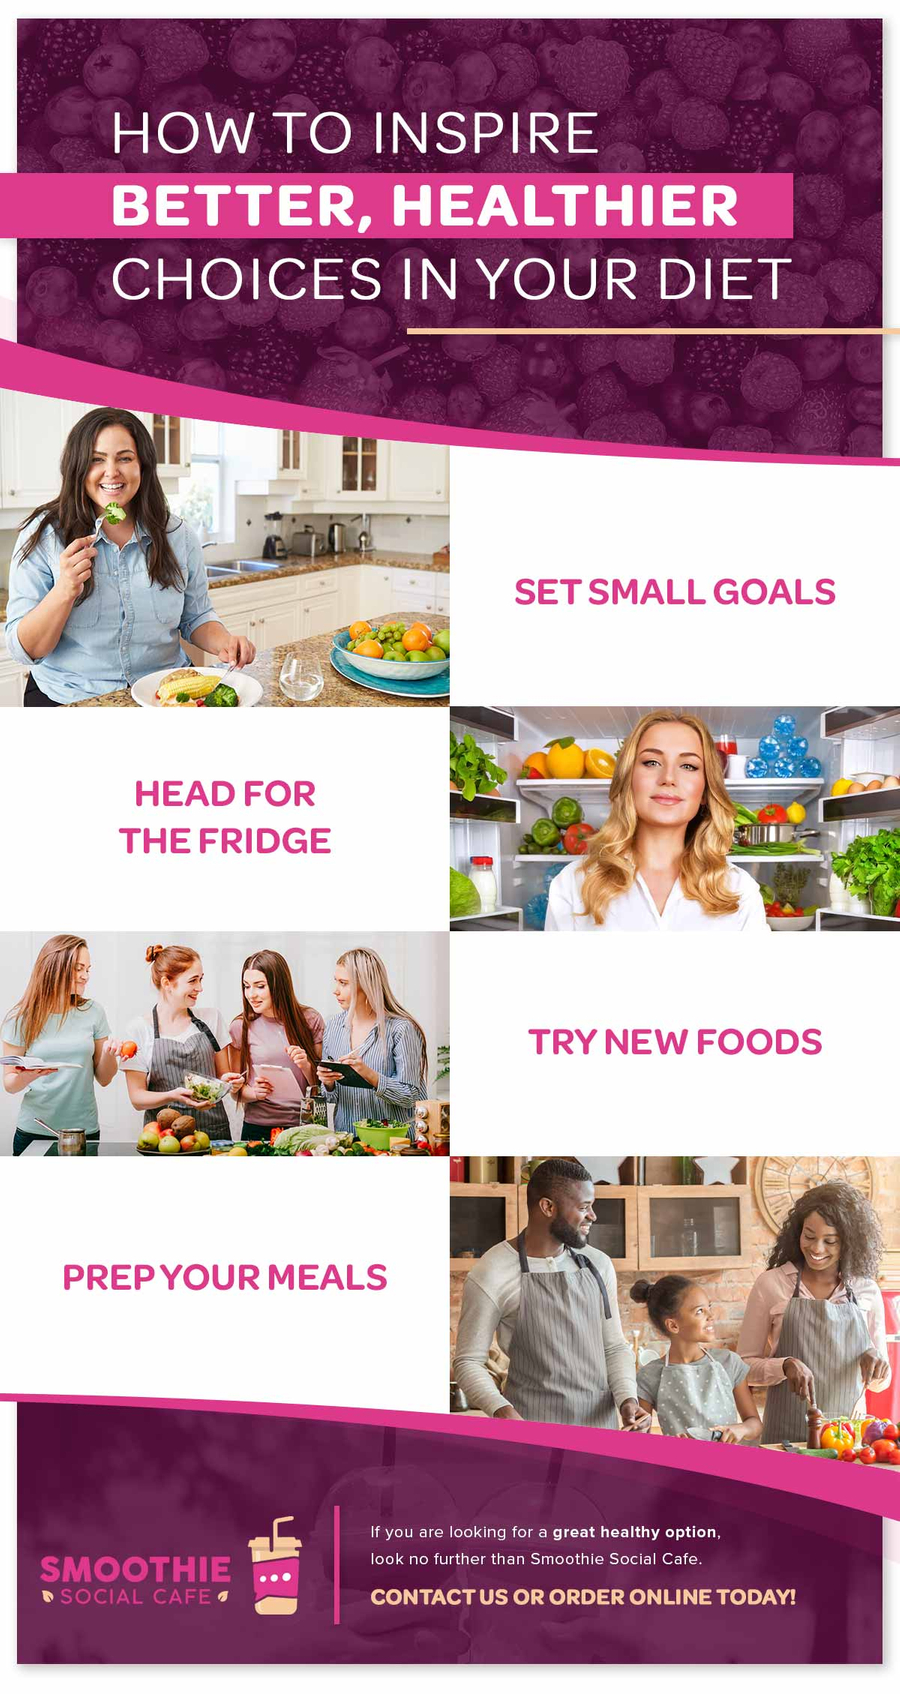 How To Inspire Better, Healthier Choices In Your Diet Infographic.jpg